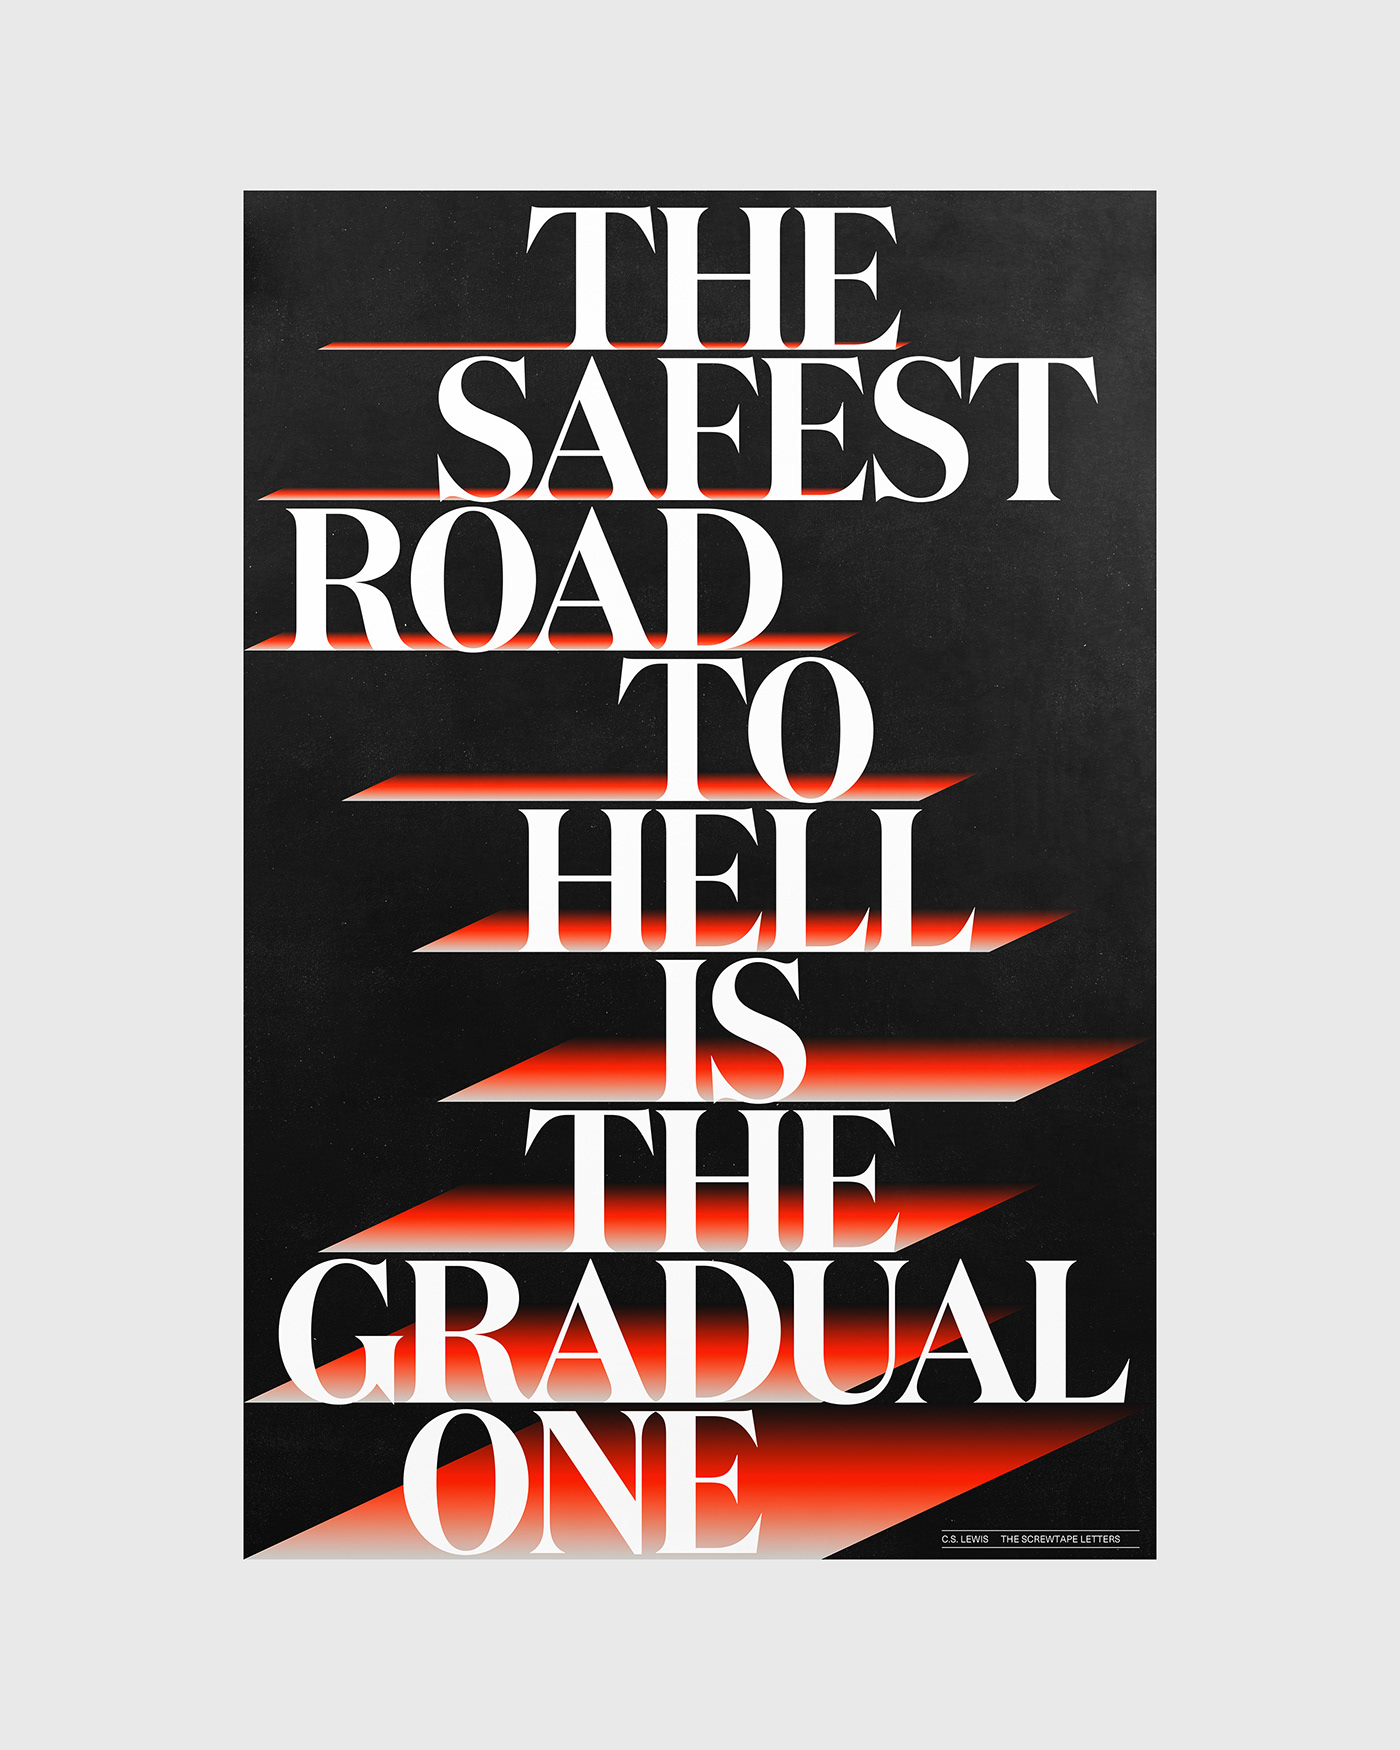 The Safest Road to Hell poster by Xtian Miller